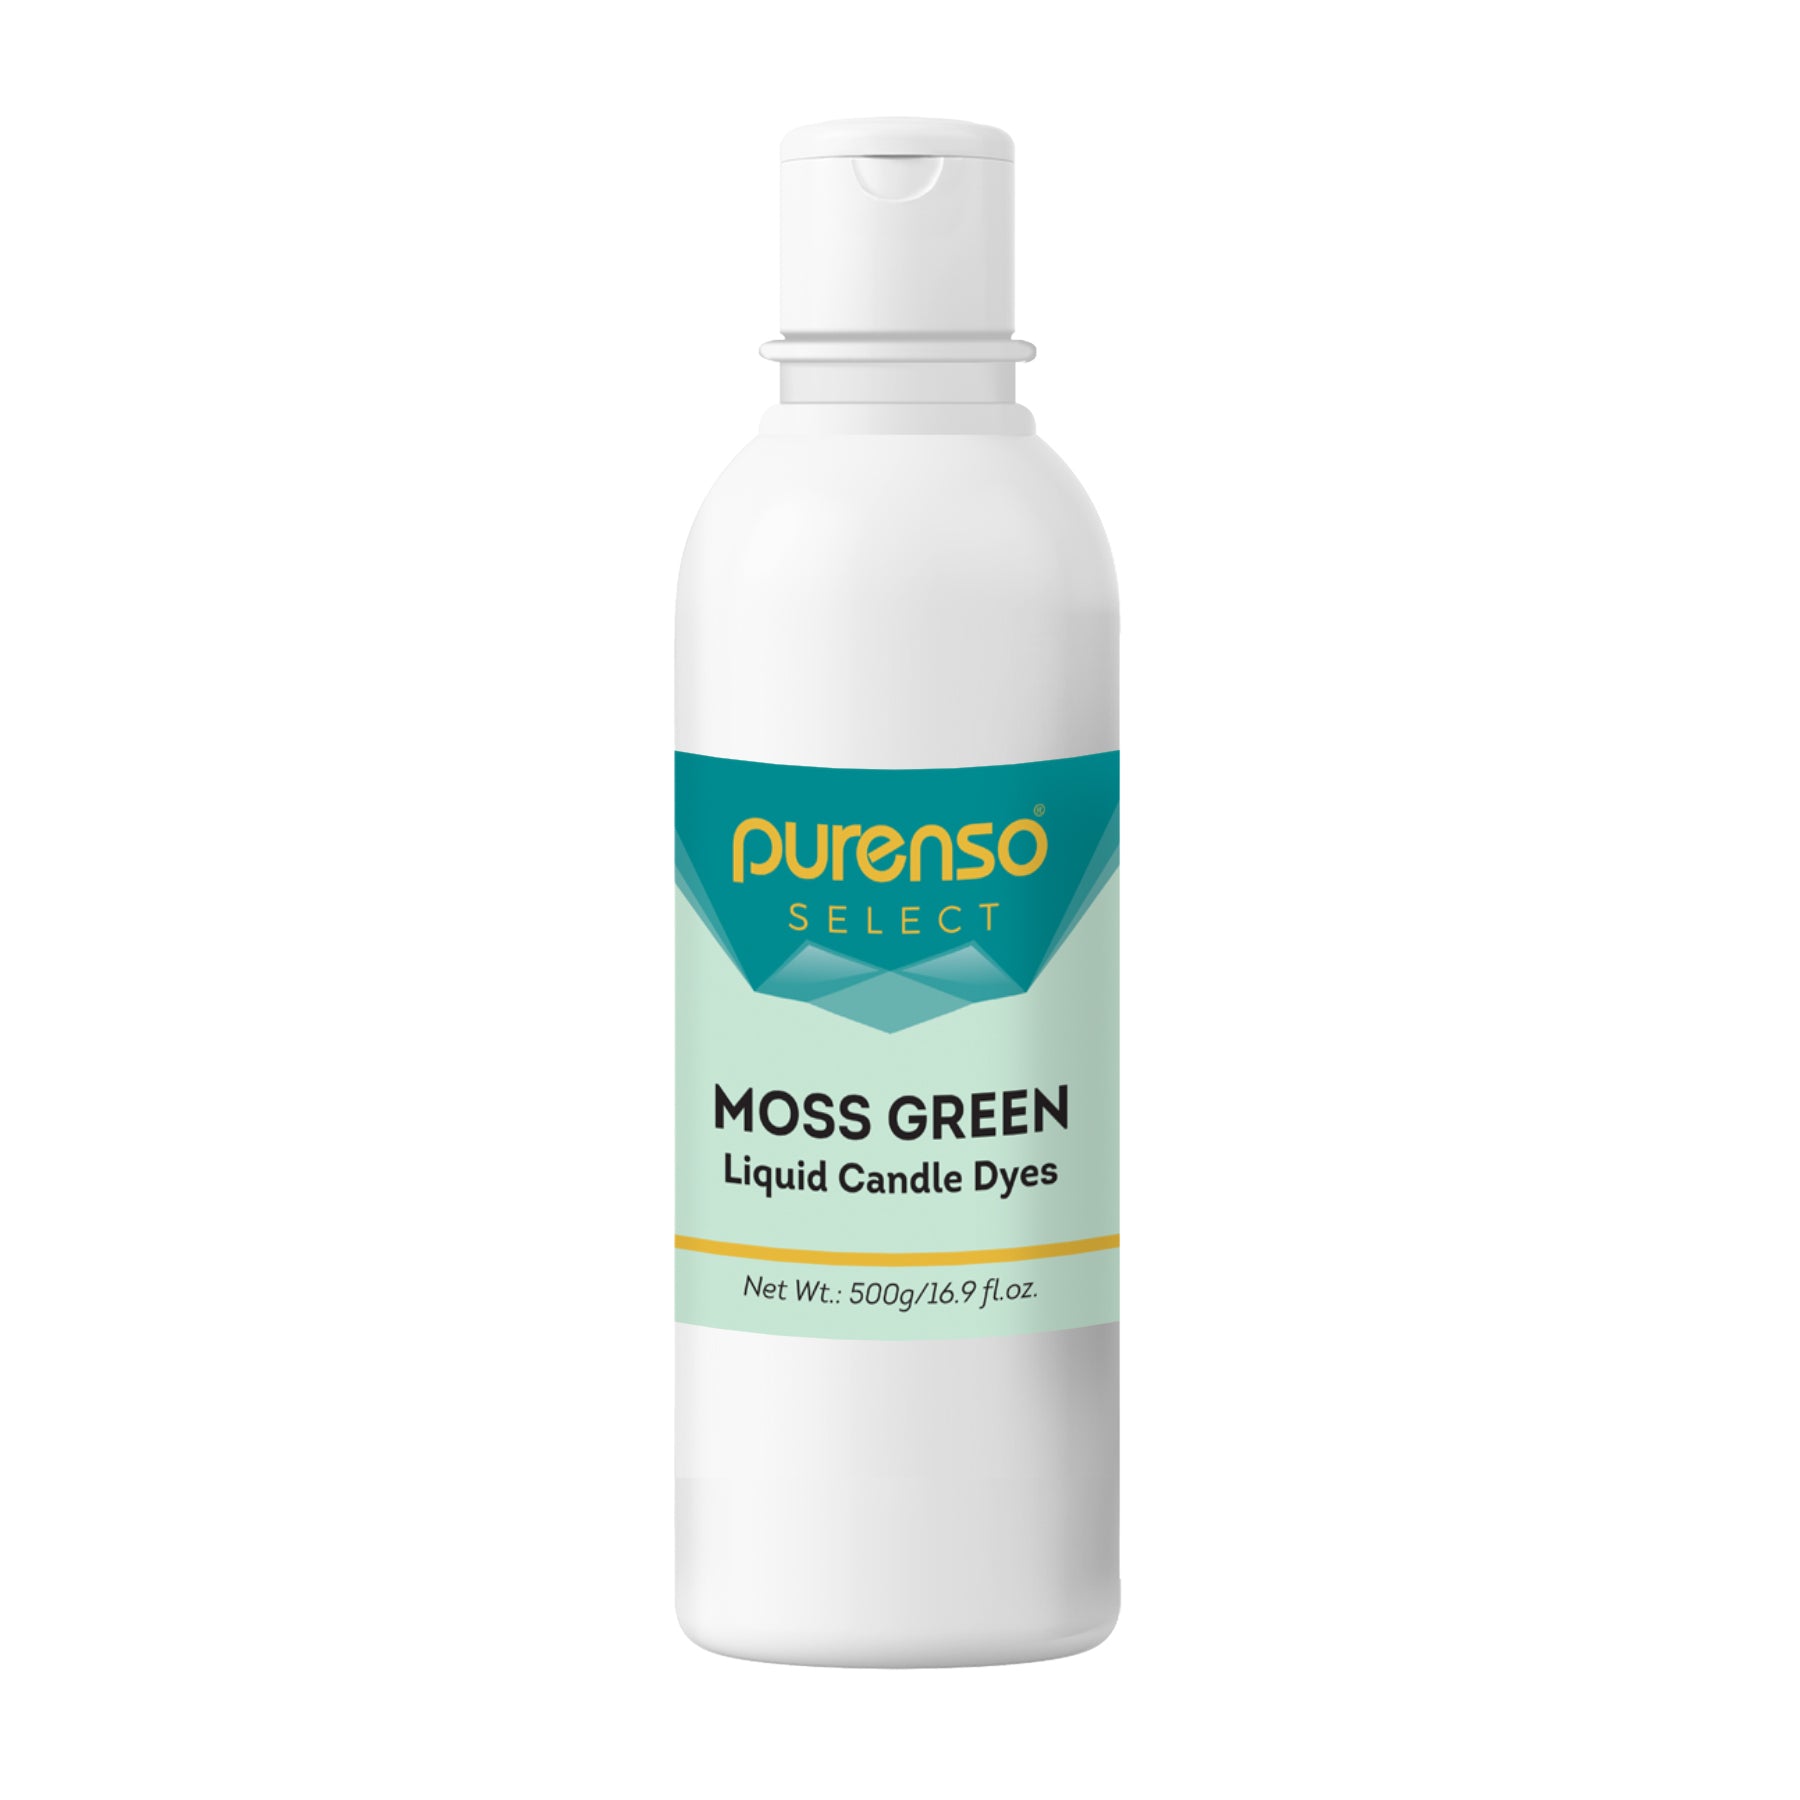 Moss Green - Liquid Candle Dyes